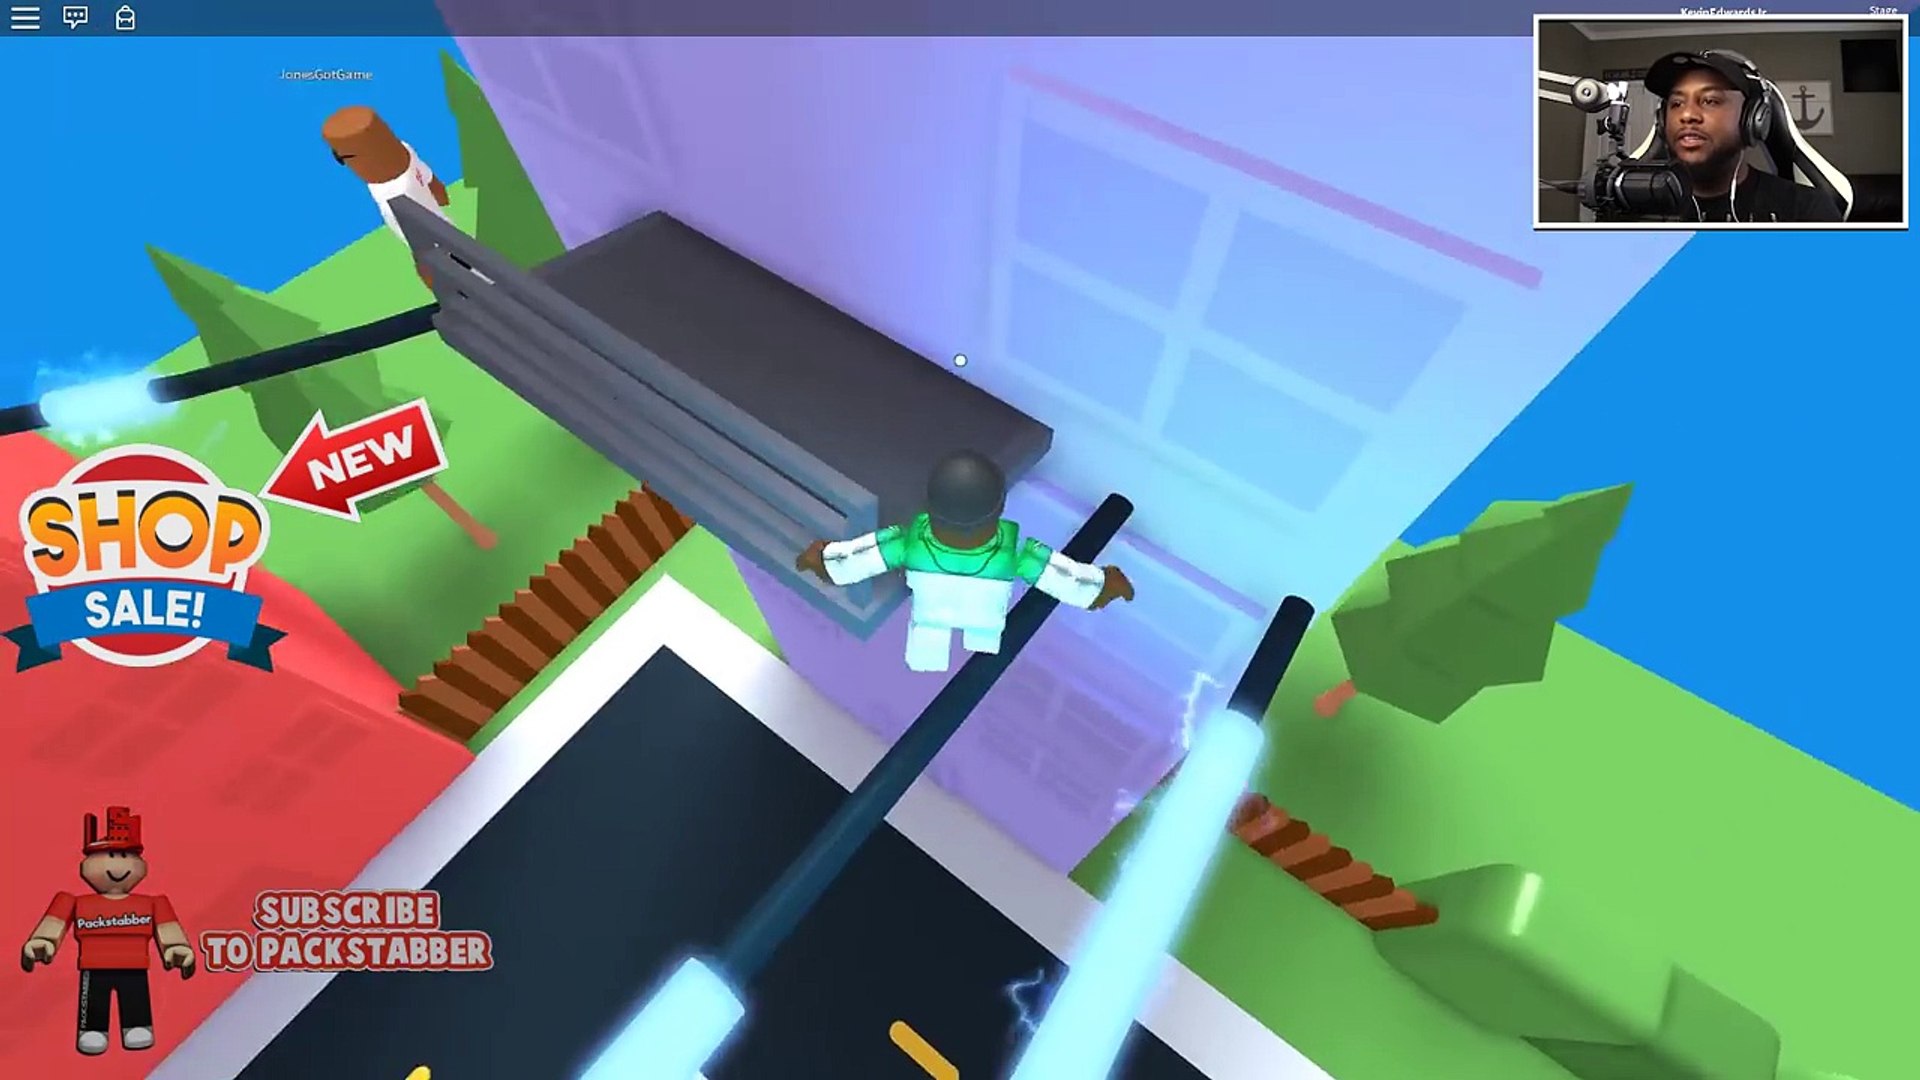 ESCAPE THE PET SHOP OBBY IN ROBLOX - Dailymotion Video